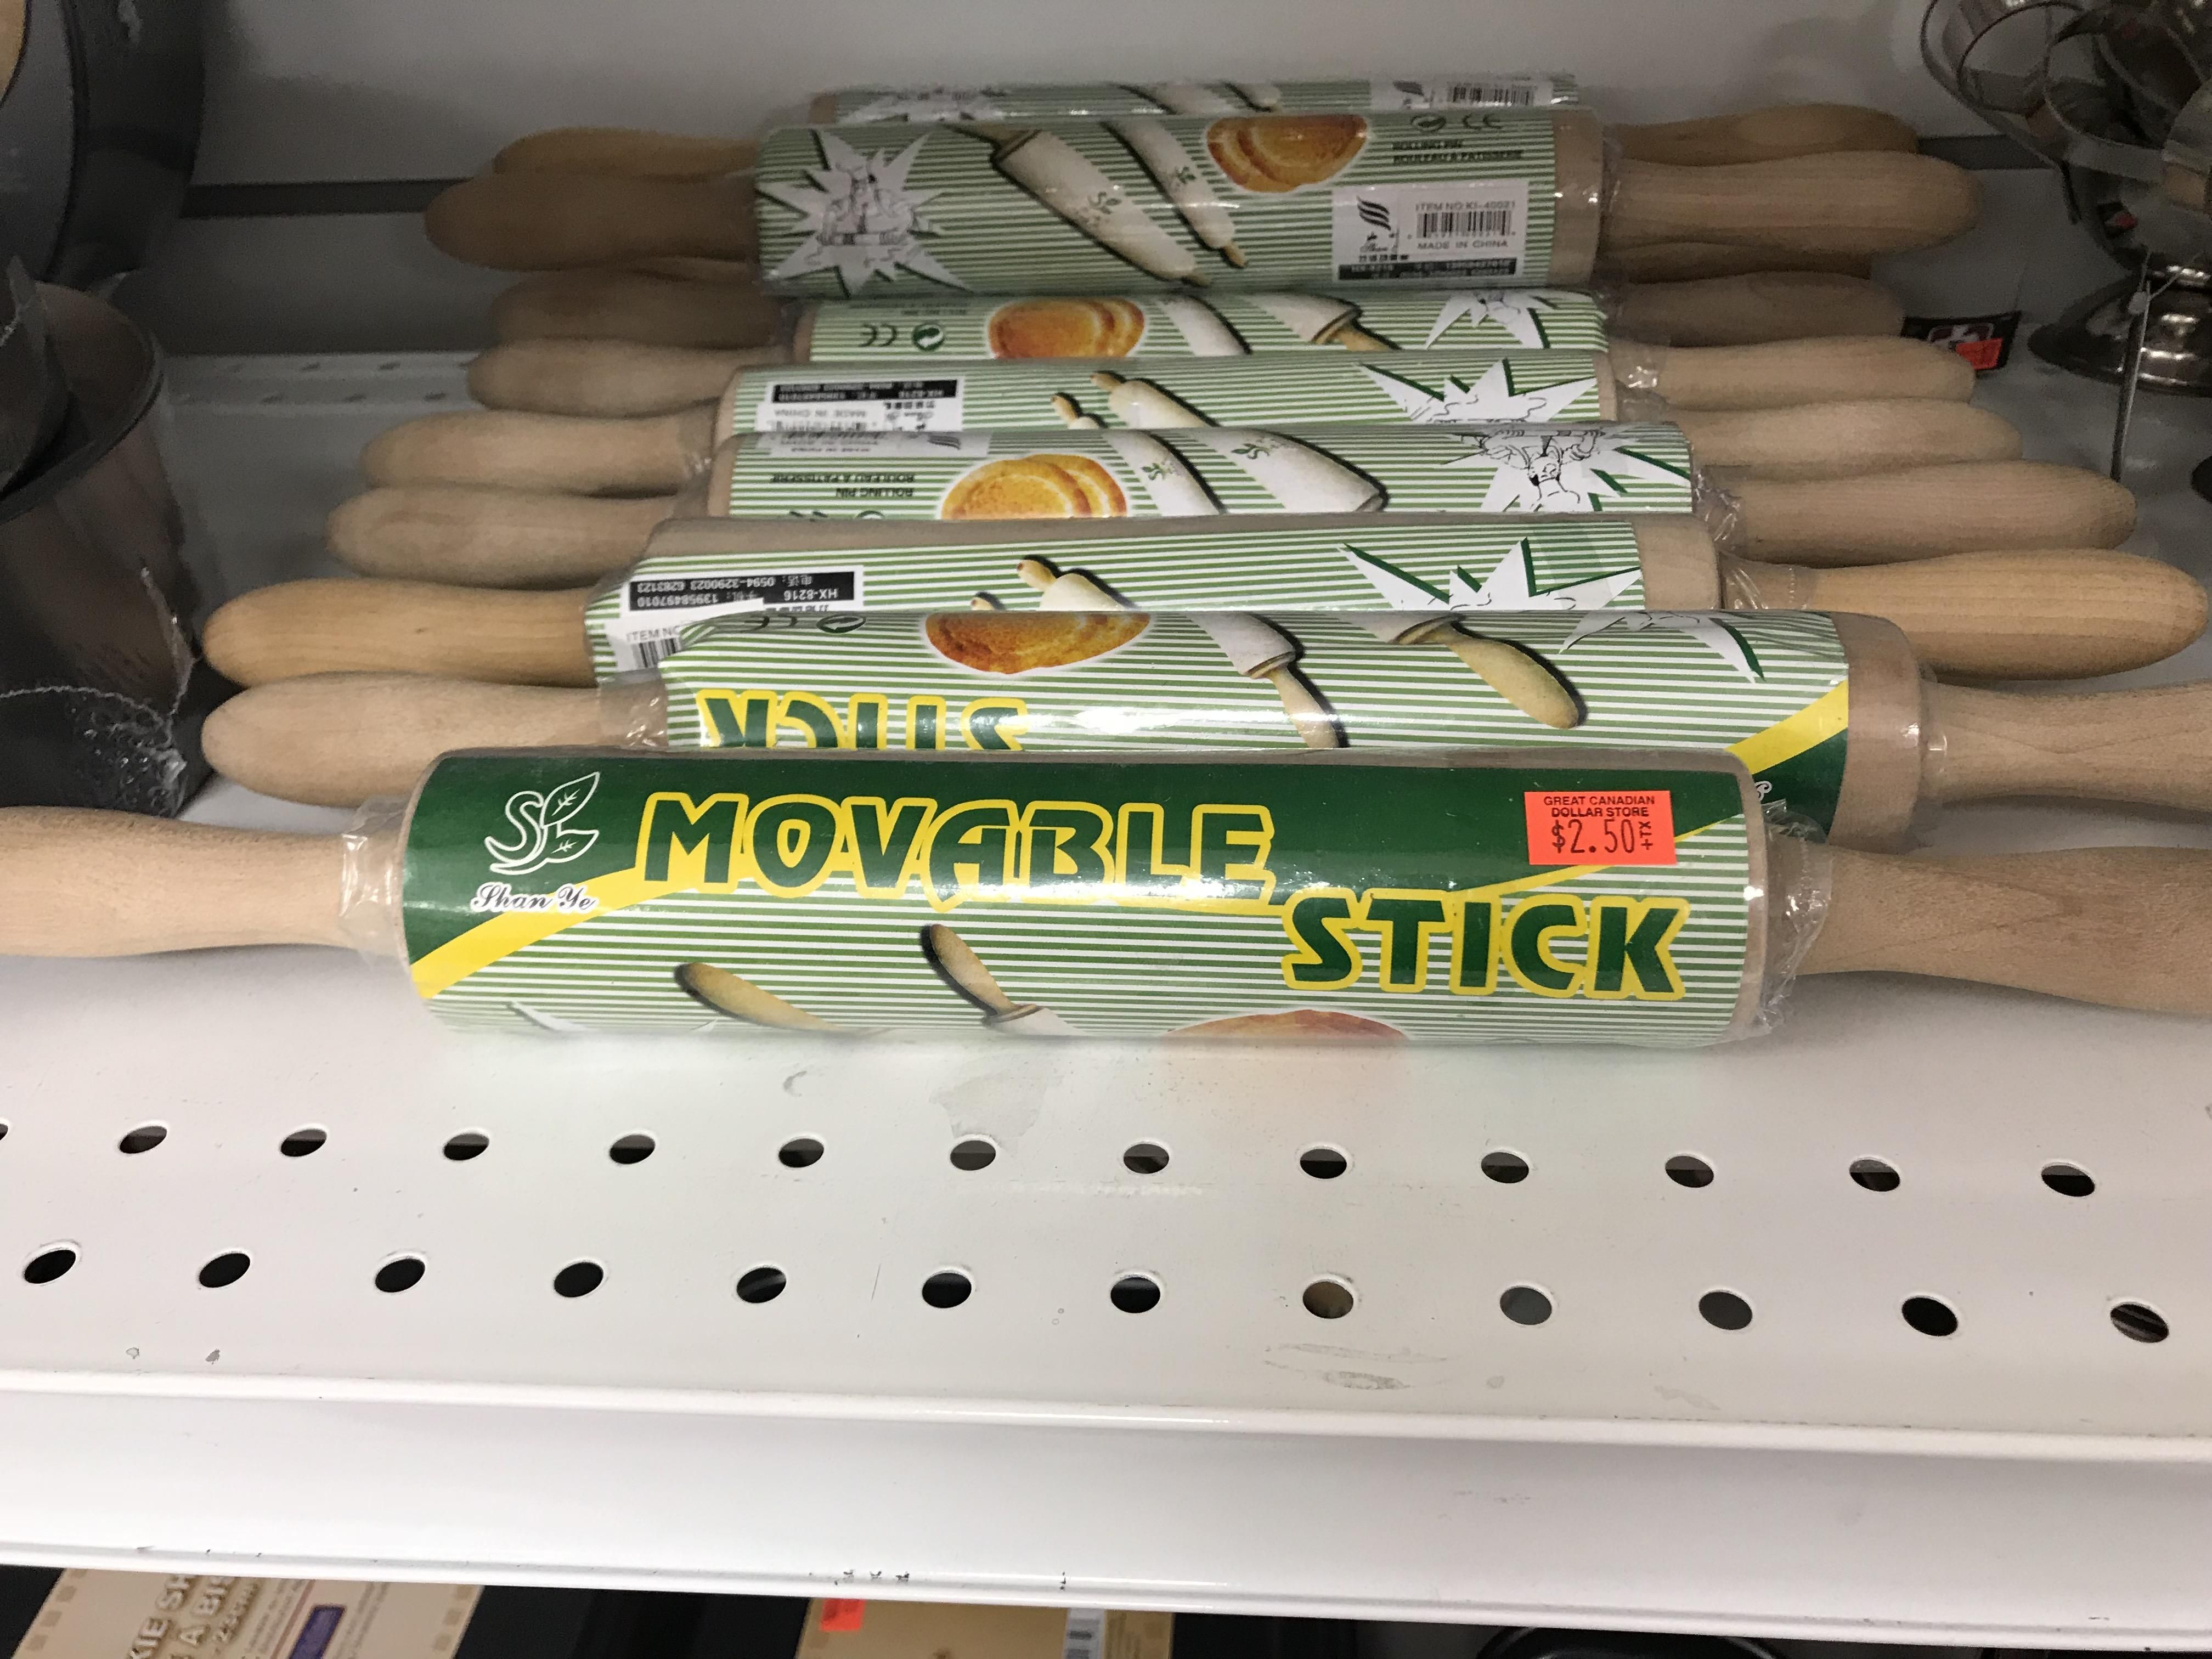 In Canada we don’t have rolling pins, we have.....